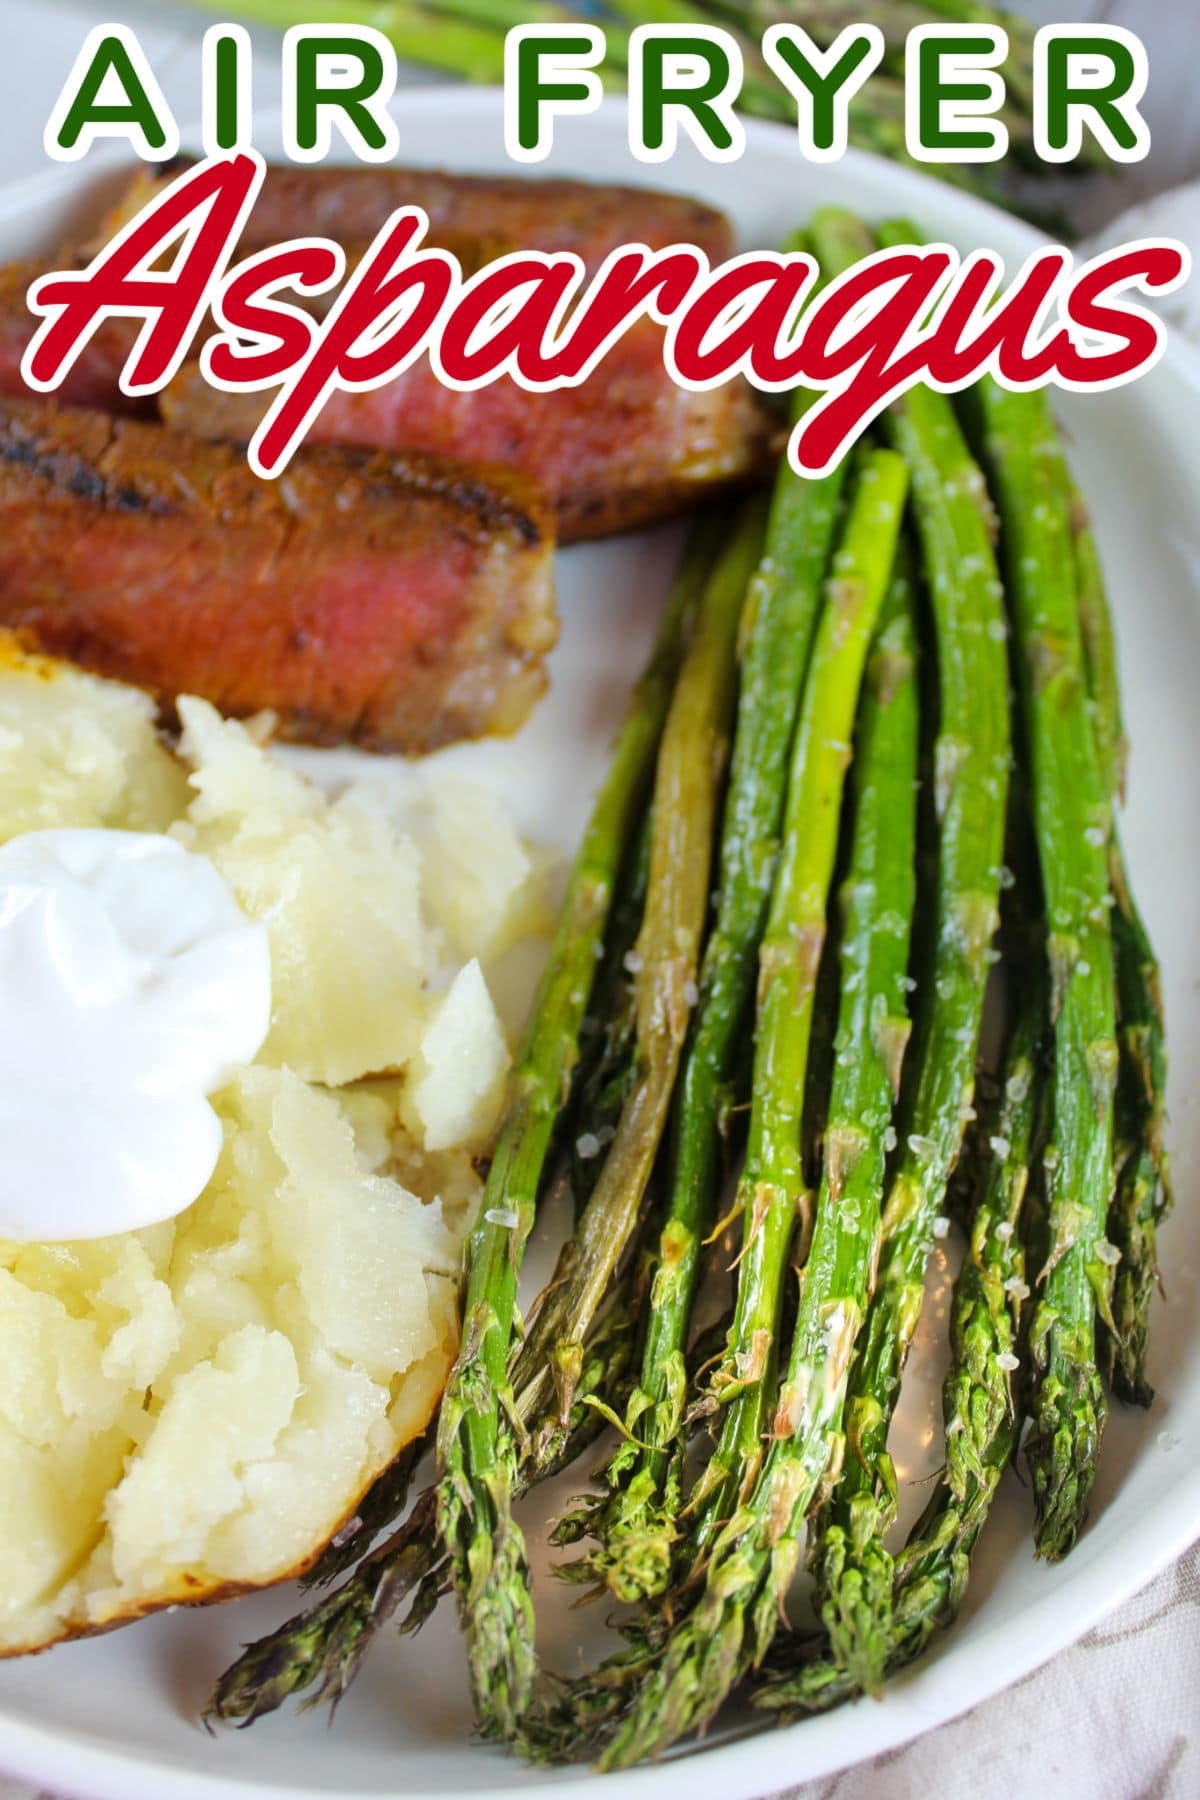 Air Fryer Asparagus is one of my favorite side dishes! You don't need anything but the vegetable and your air fryer - delicious every time! And it only takes a few minutes!  via @foodhussy